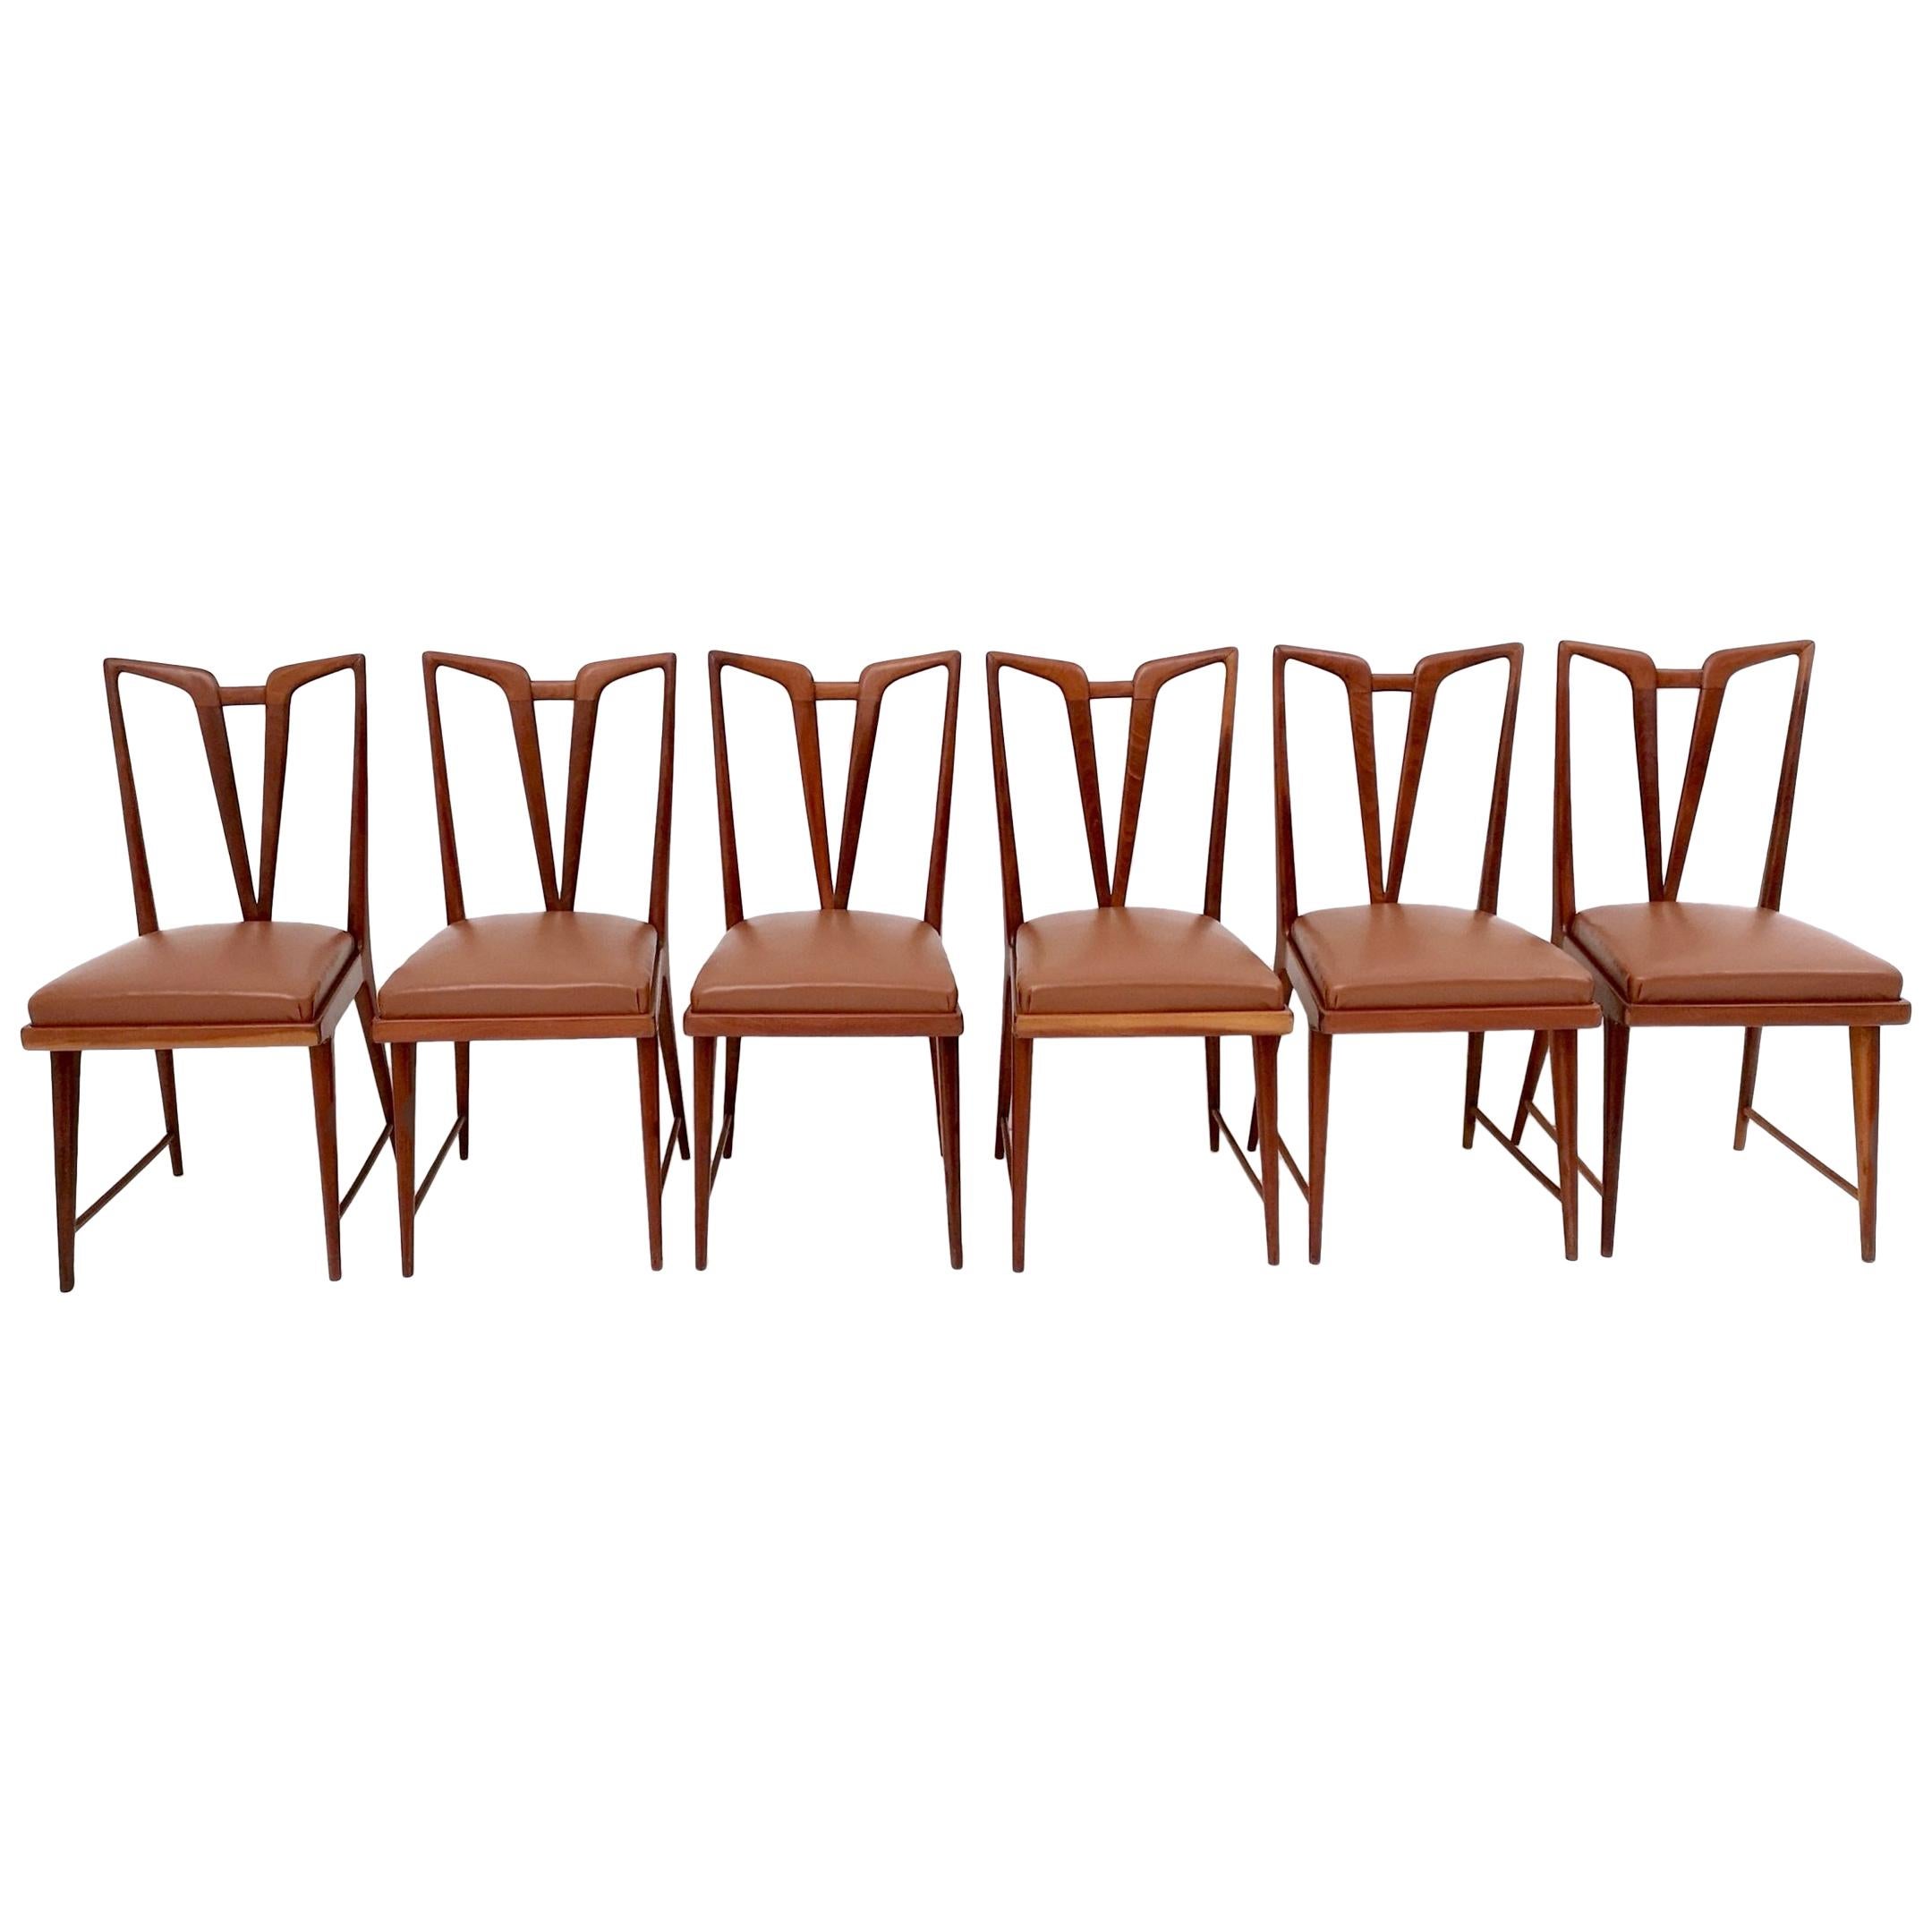 Set of Six Vintage Solid Wood Dining Chairs with Brown Skai Upholstery, Italy